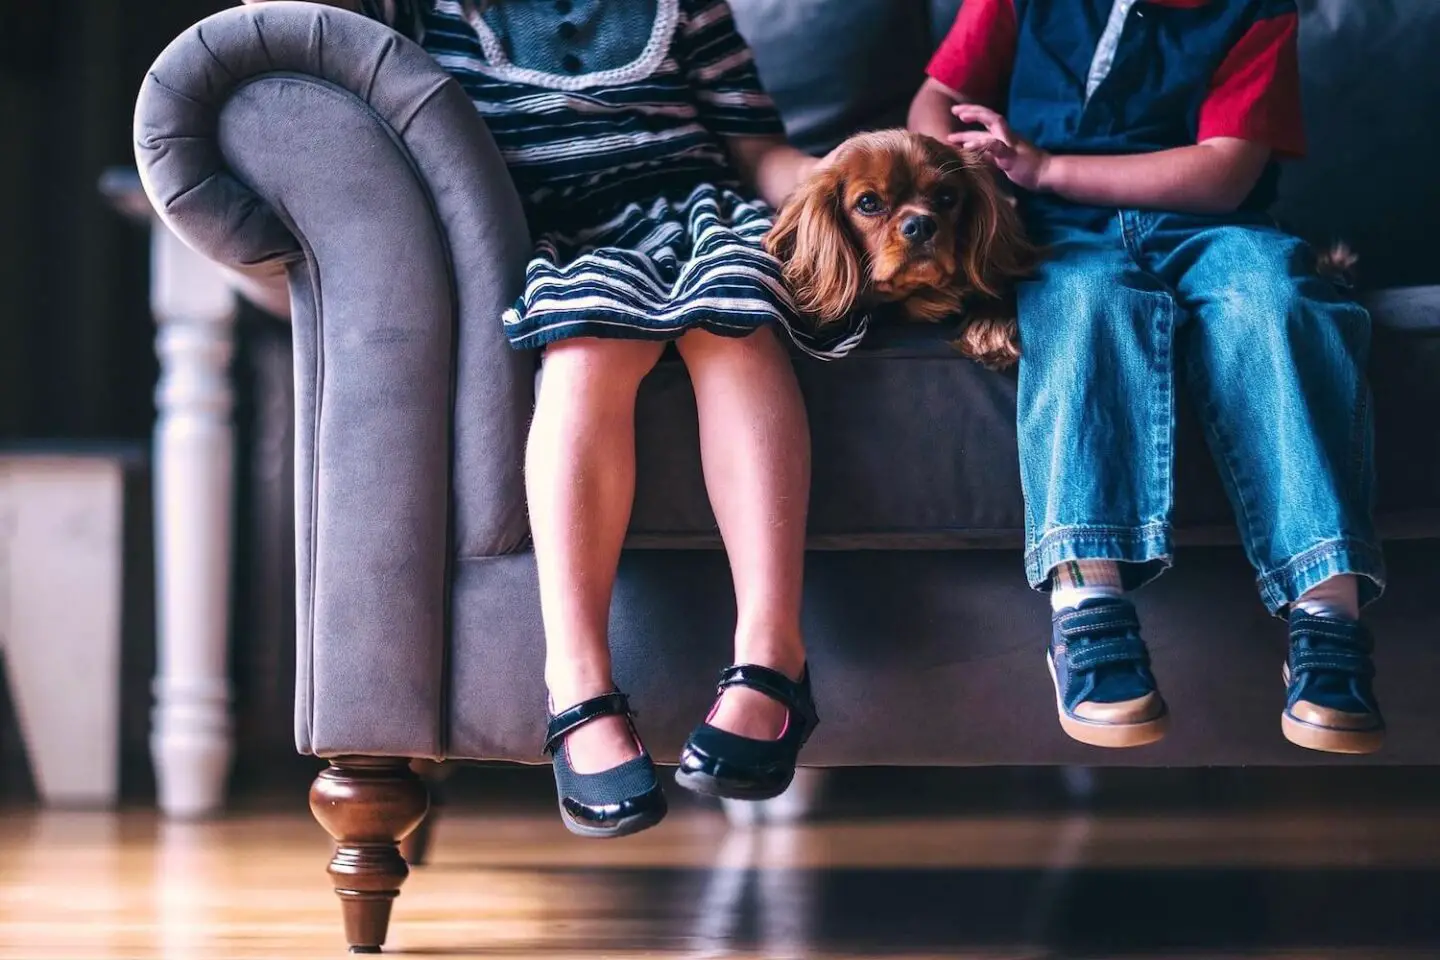 The legs of 2 children sitting on a sofa, stroking a Spaniel